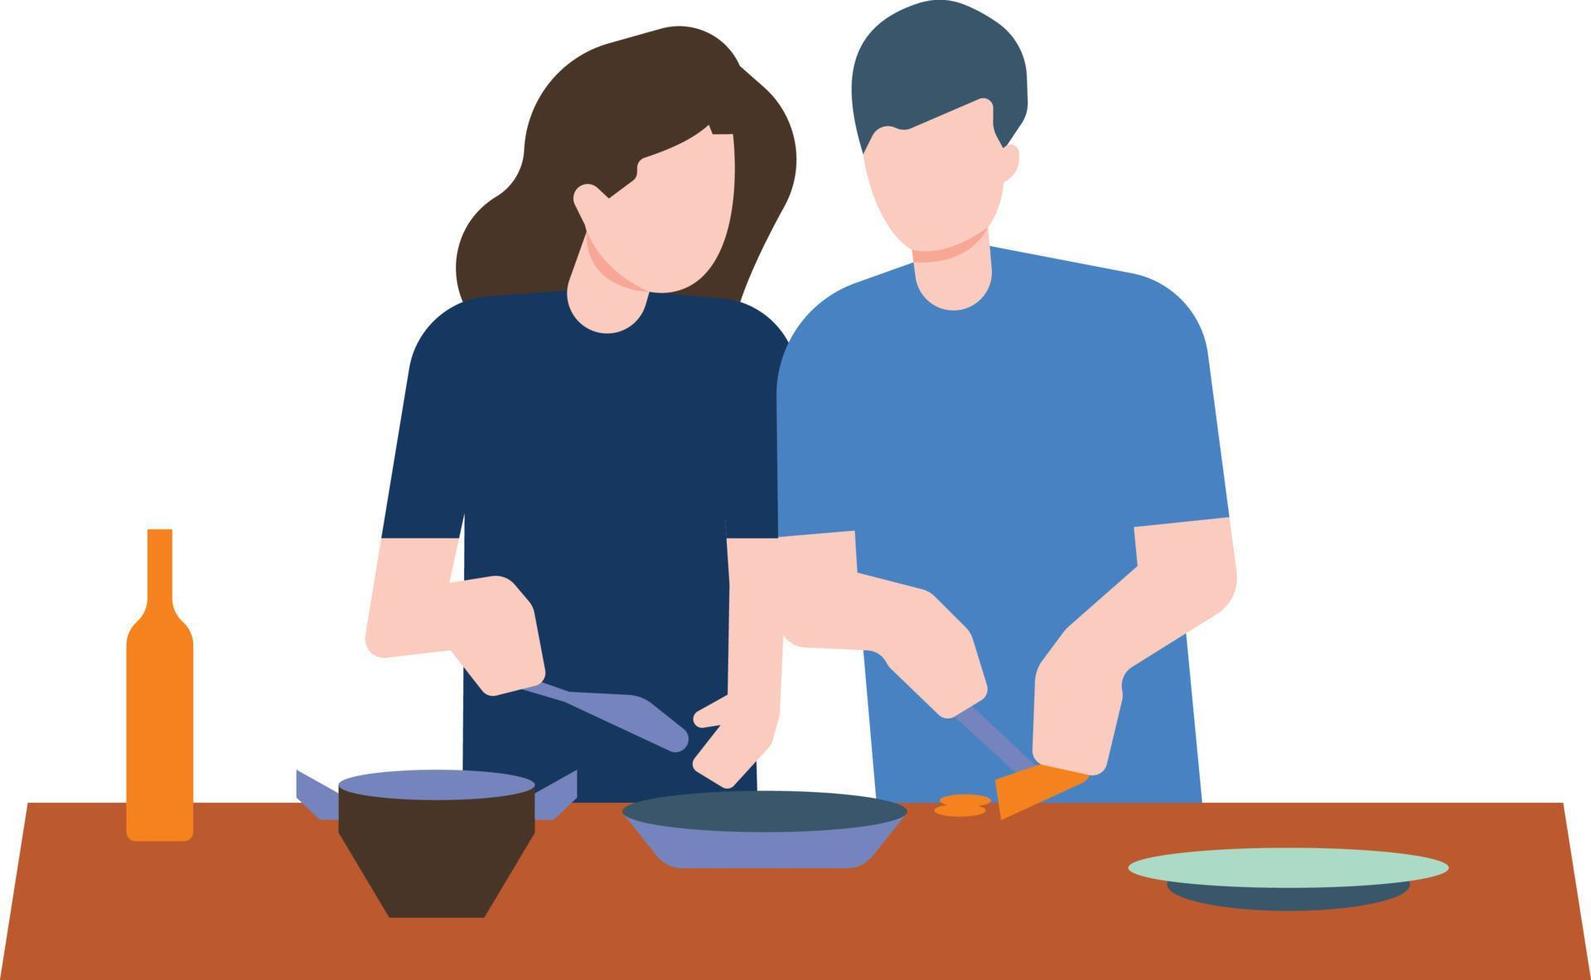 The couple is cooking. vector